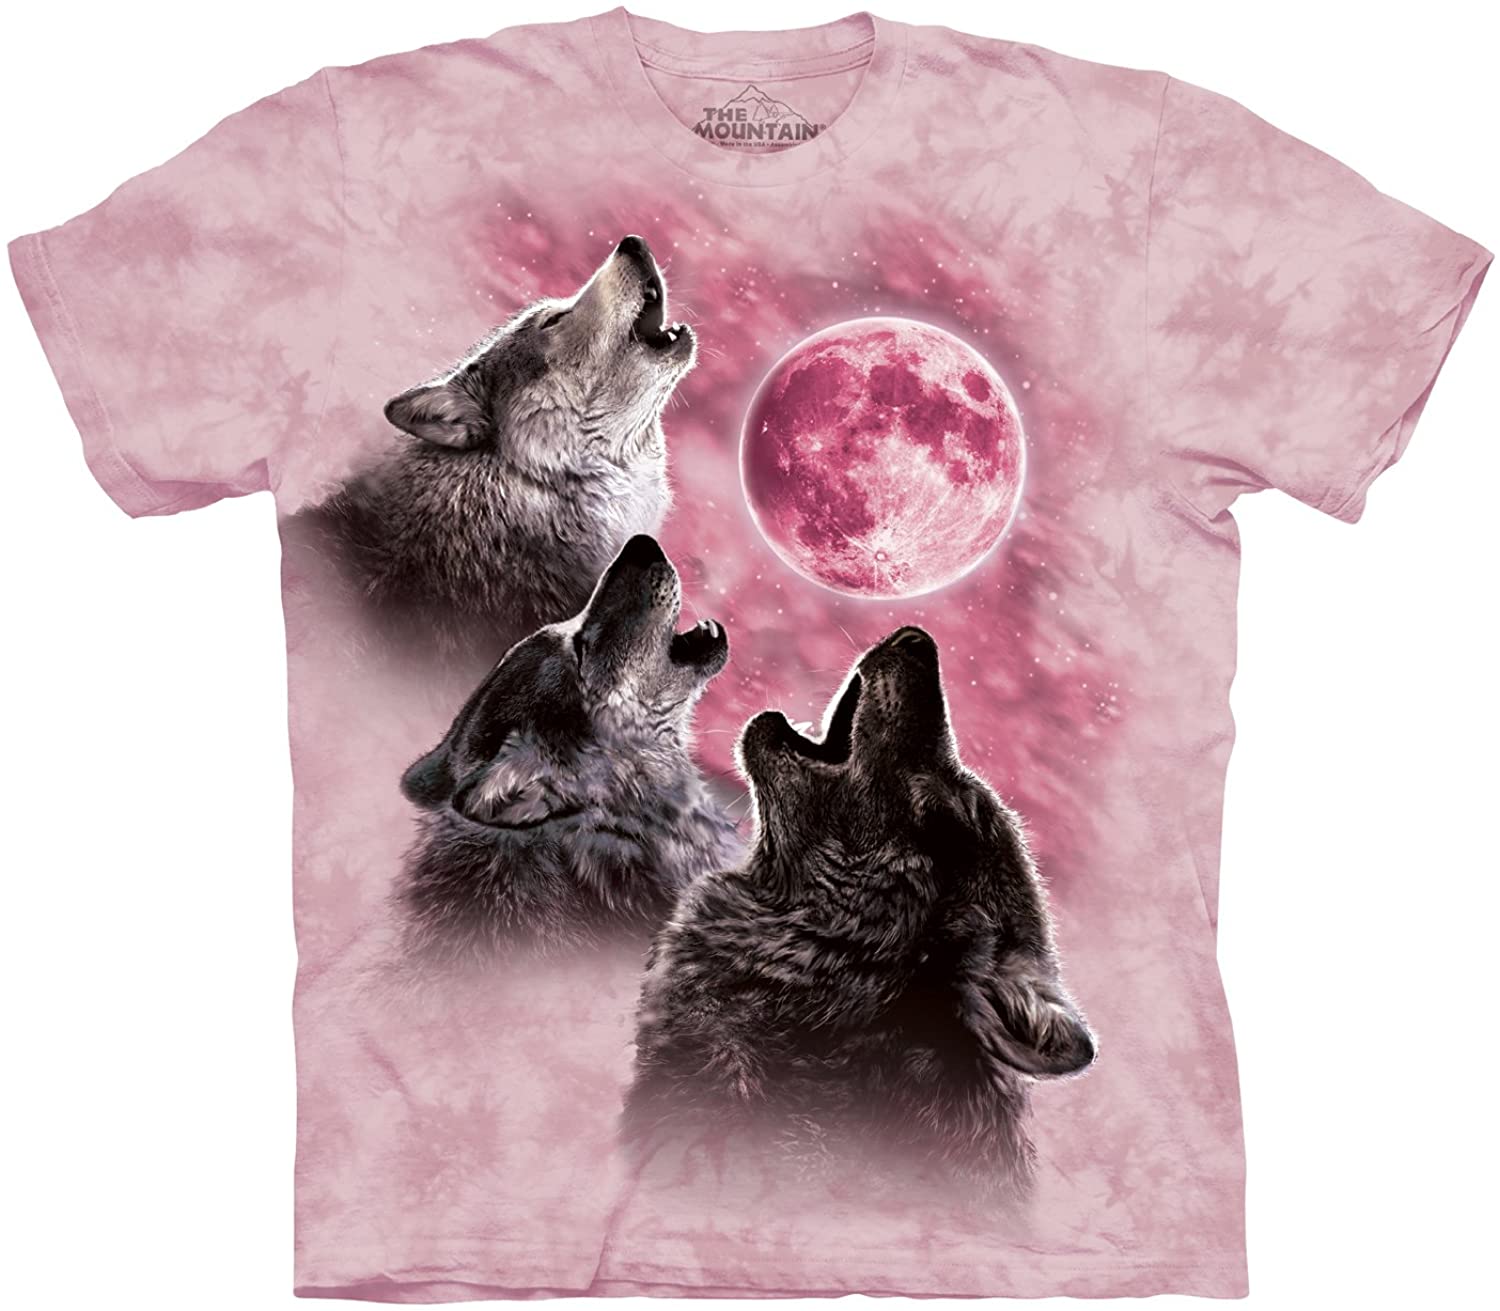 The Mountain Store + Three Wolf Moon T-Shirt